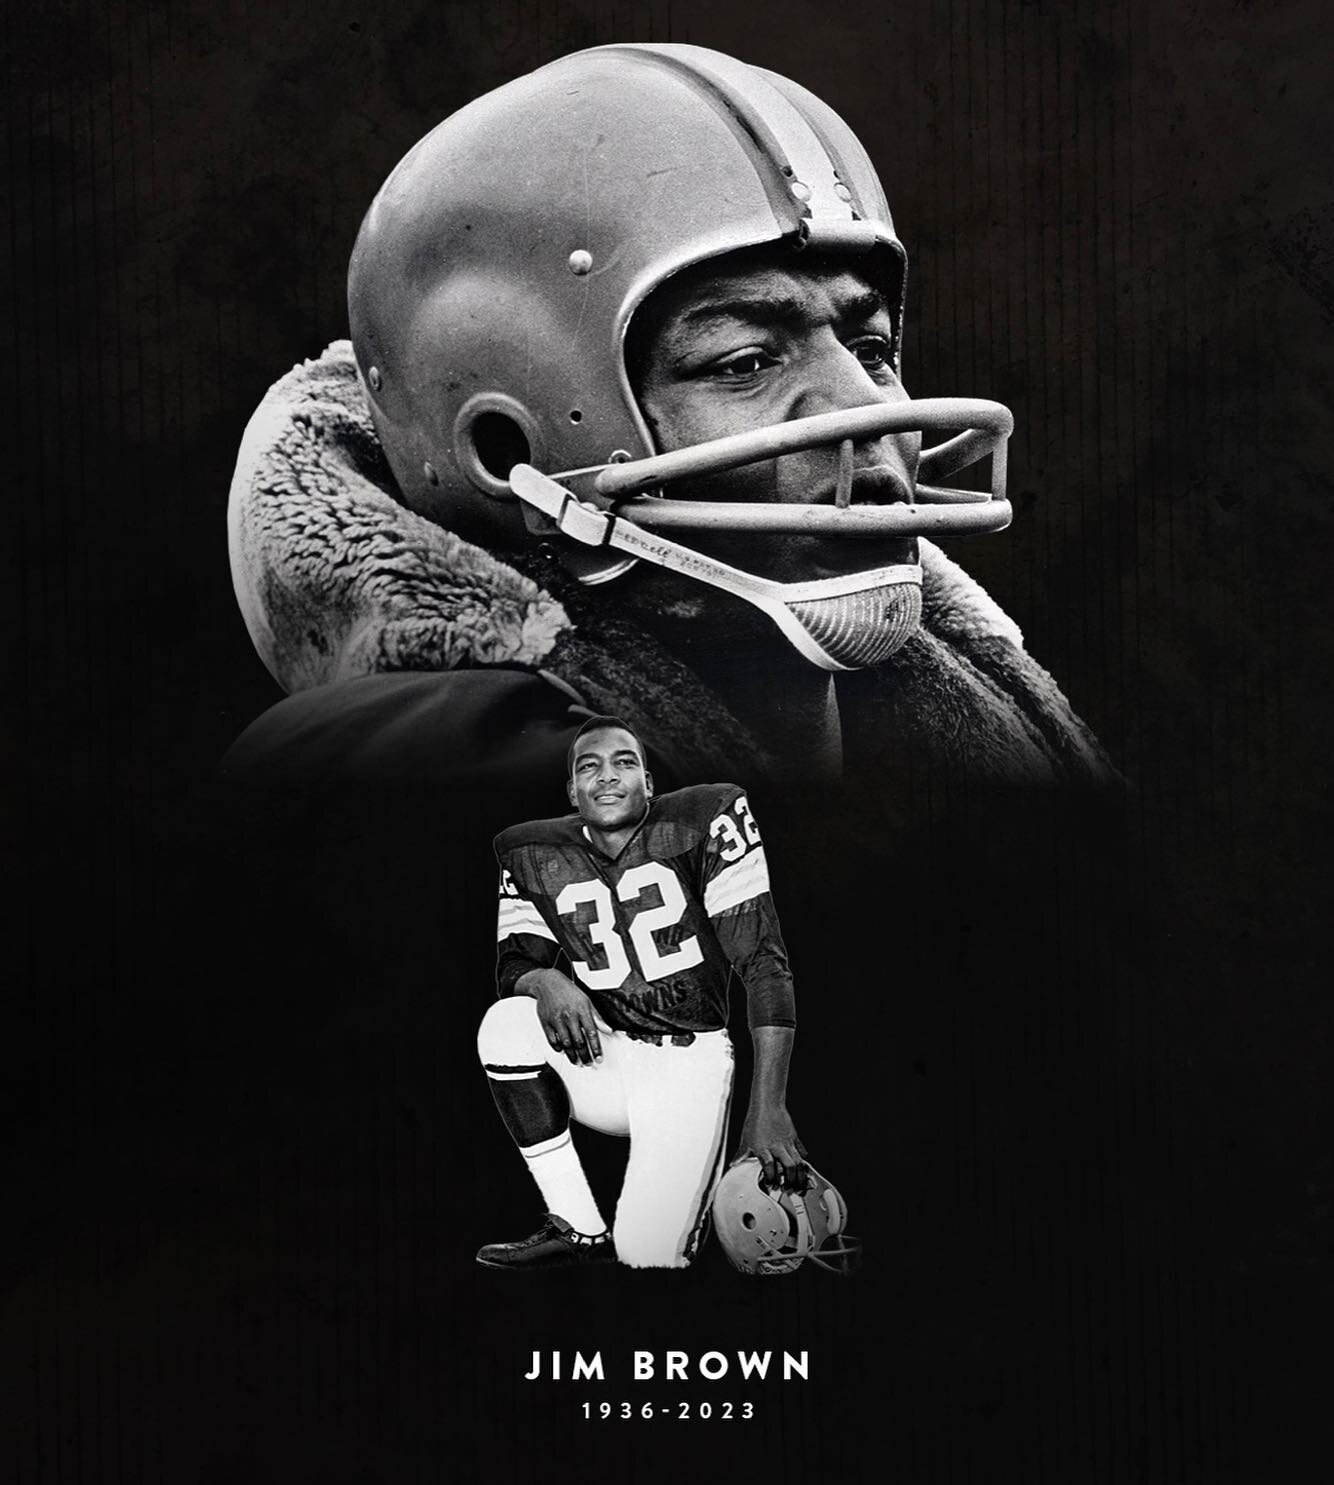 Rest in Peace to the legend, Jim Brown, a Pro Football Hall of Famer, civil rights advocate and actor.  Jim never lacked courage to stand up for what&rsquo;s right.
~
#theopolisvineyards #RIP #JimBrown #HOF #NFL #civilrights #actor #clevelandbrowns